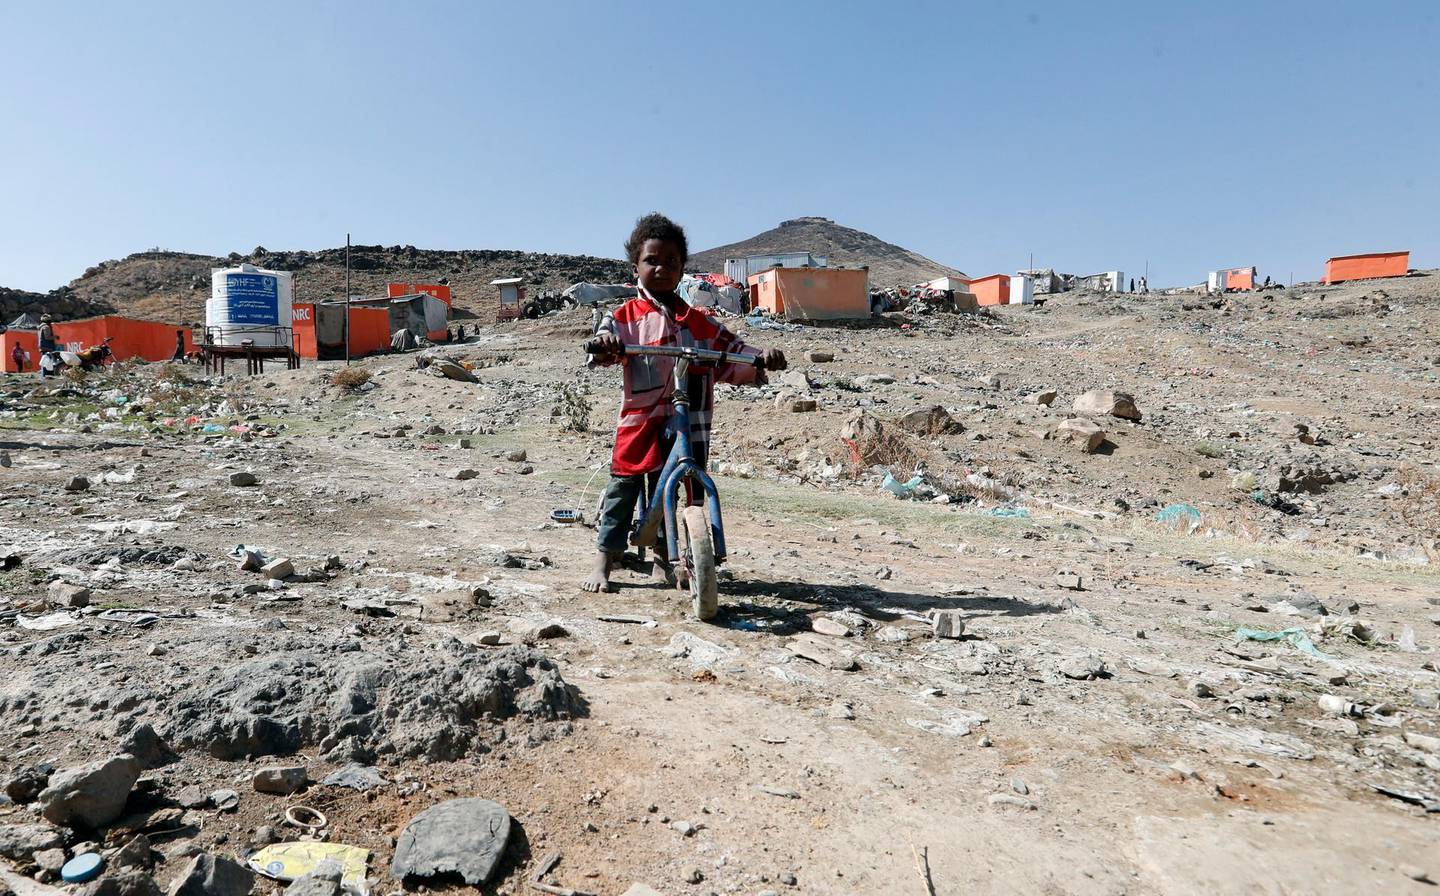 epa09045447 A displaced Yemeni child ride a bicycle at a camp for Internally Displaced Persons (IDPs) on the outskirts of Sana'a, Yemen, 01 March 2021. The five-year al-Azraqeen IDPs camp in the northern outskirts of Sana'a was rebuilt by the Norwegian Refugee Council in 2020 with orange wooden huts in place of the tents and small stone huts that the displaced people were using as their refuges. The camp hosts more than 60 displaced families, who were forcibly displaced by the escalating fighting in the northern areas of Yemen. The prolonged conflict has plunged Yemen into the world's largest humanitarian crisis with an estimated 80 percent of Yemen's 29 million-population are in need of humanitarian assistance, and led to the displacement of more than three million people.  EPA/YAHYA ARHAB